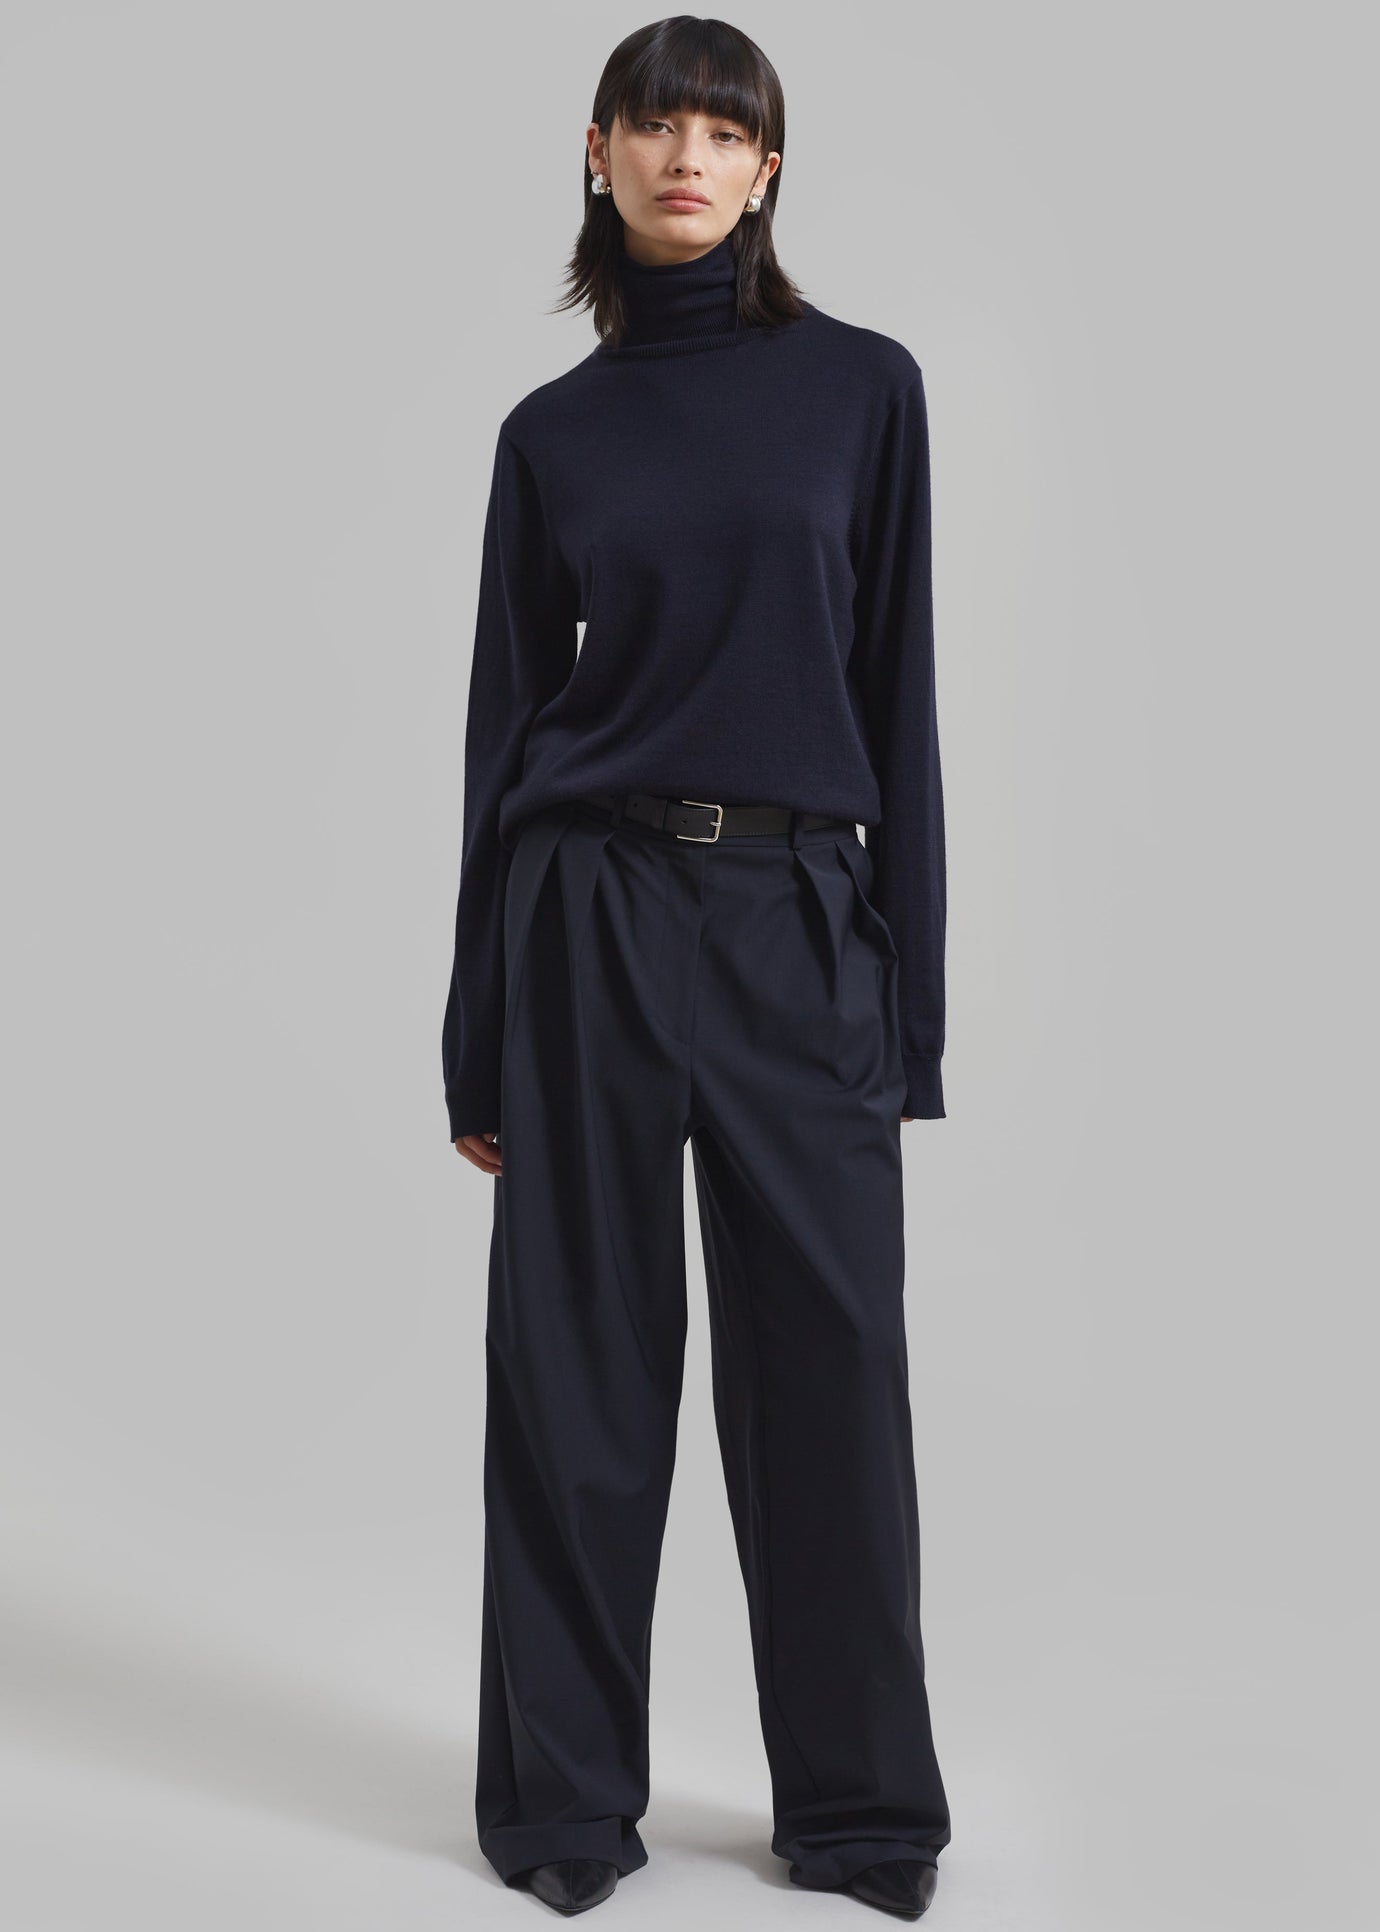 Pieces flared knit pants in navy - part of a set